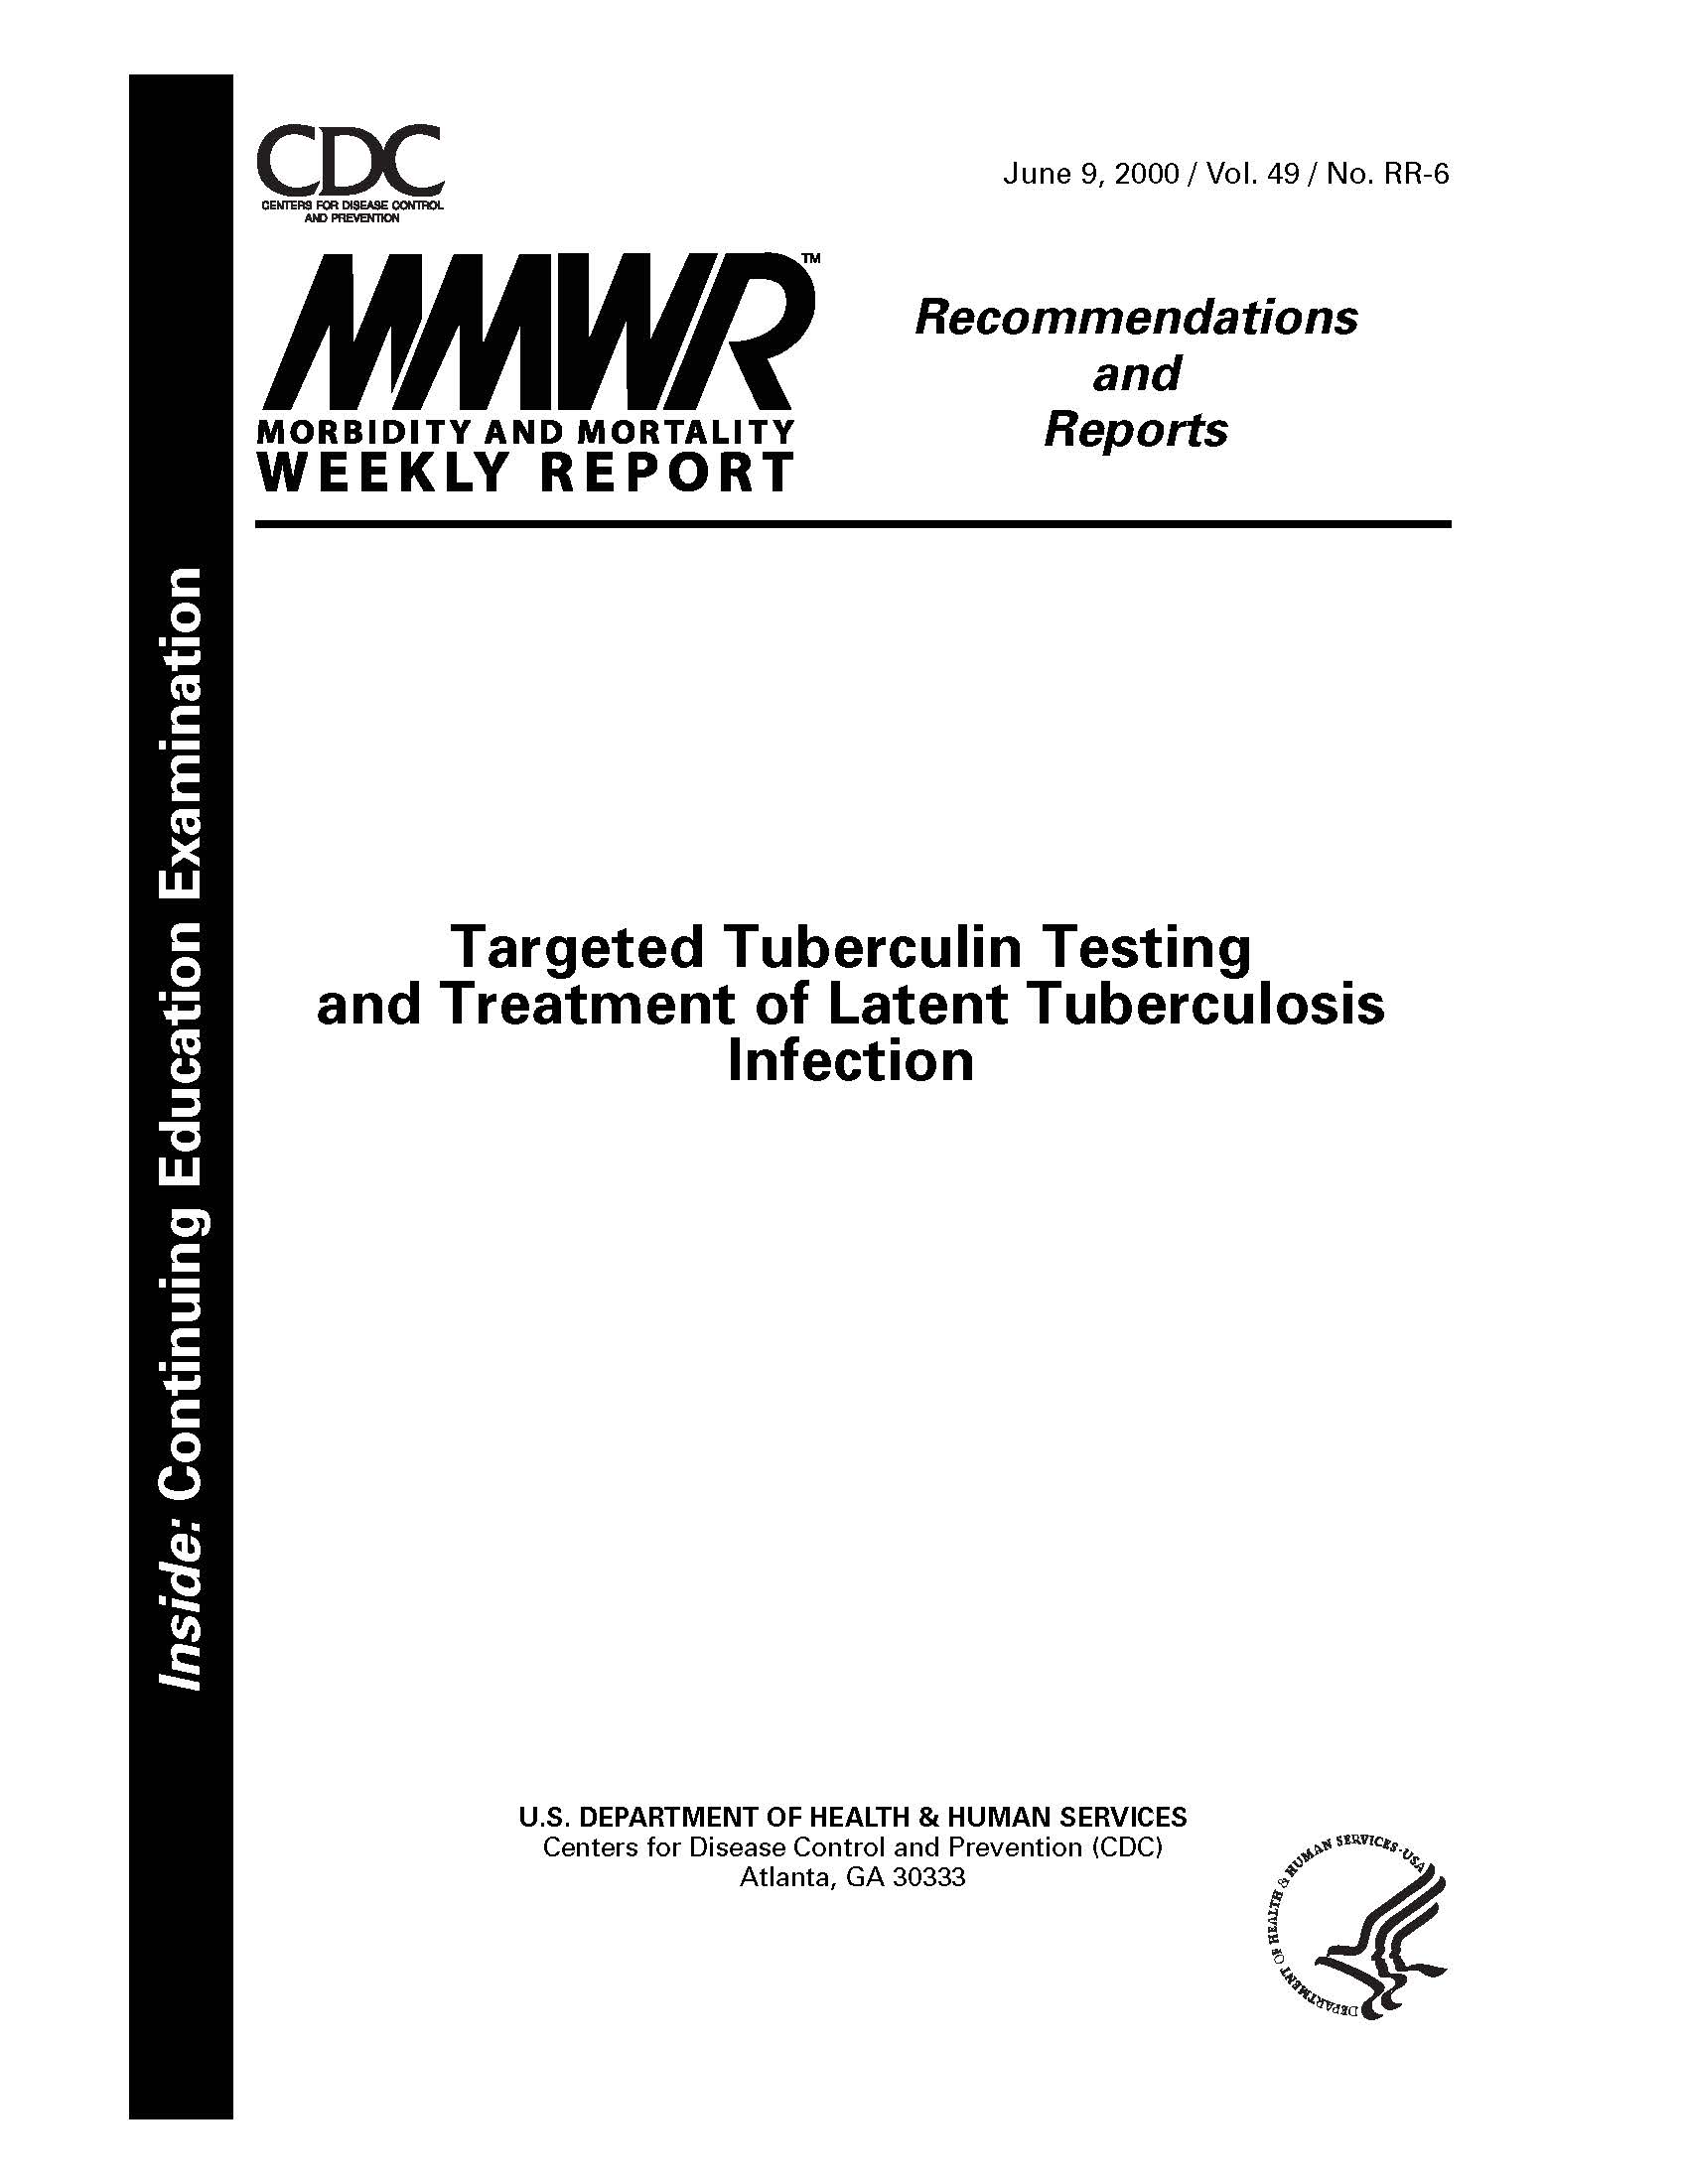 Targeted Tuberculin Testing and Treatment of Latent Tuberculosis Infection pdf image